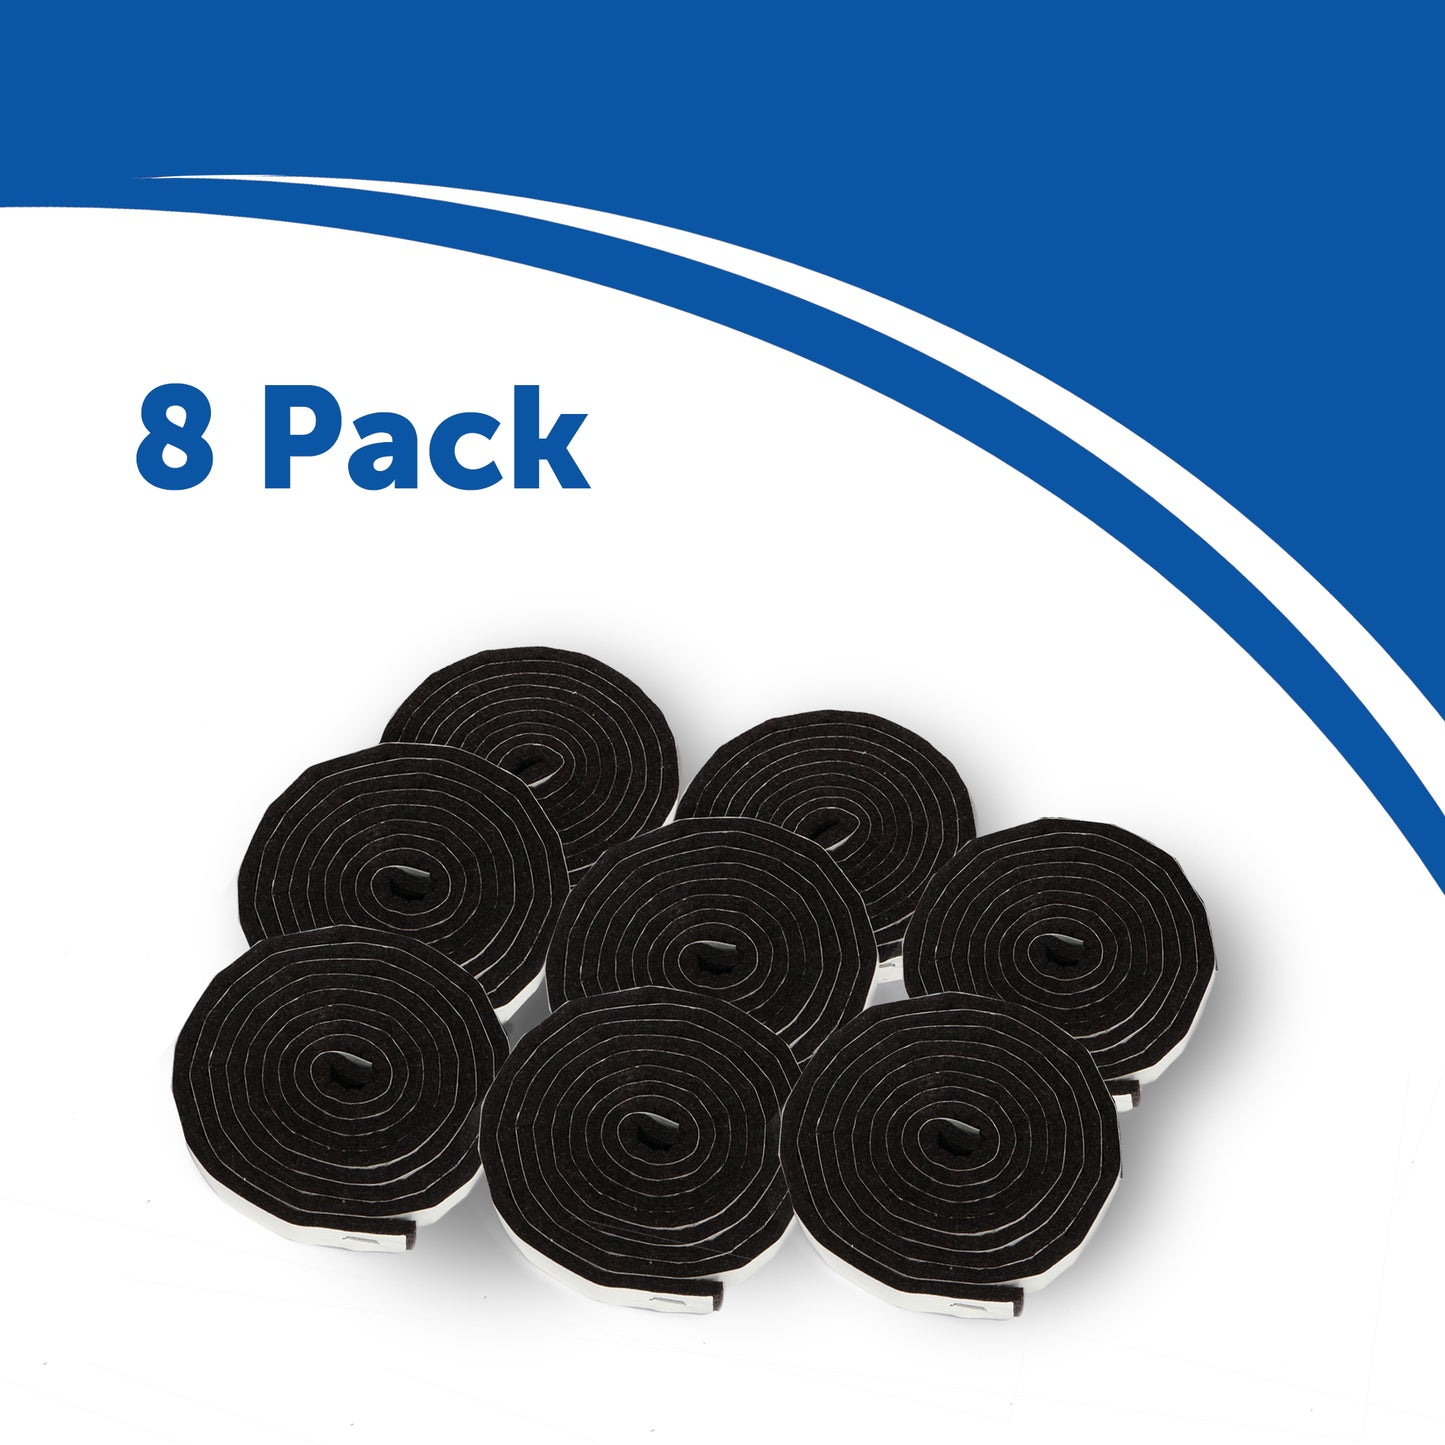 8 Pack SIMALA furniture pads for wooden floors